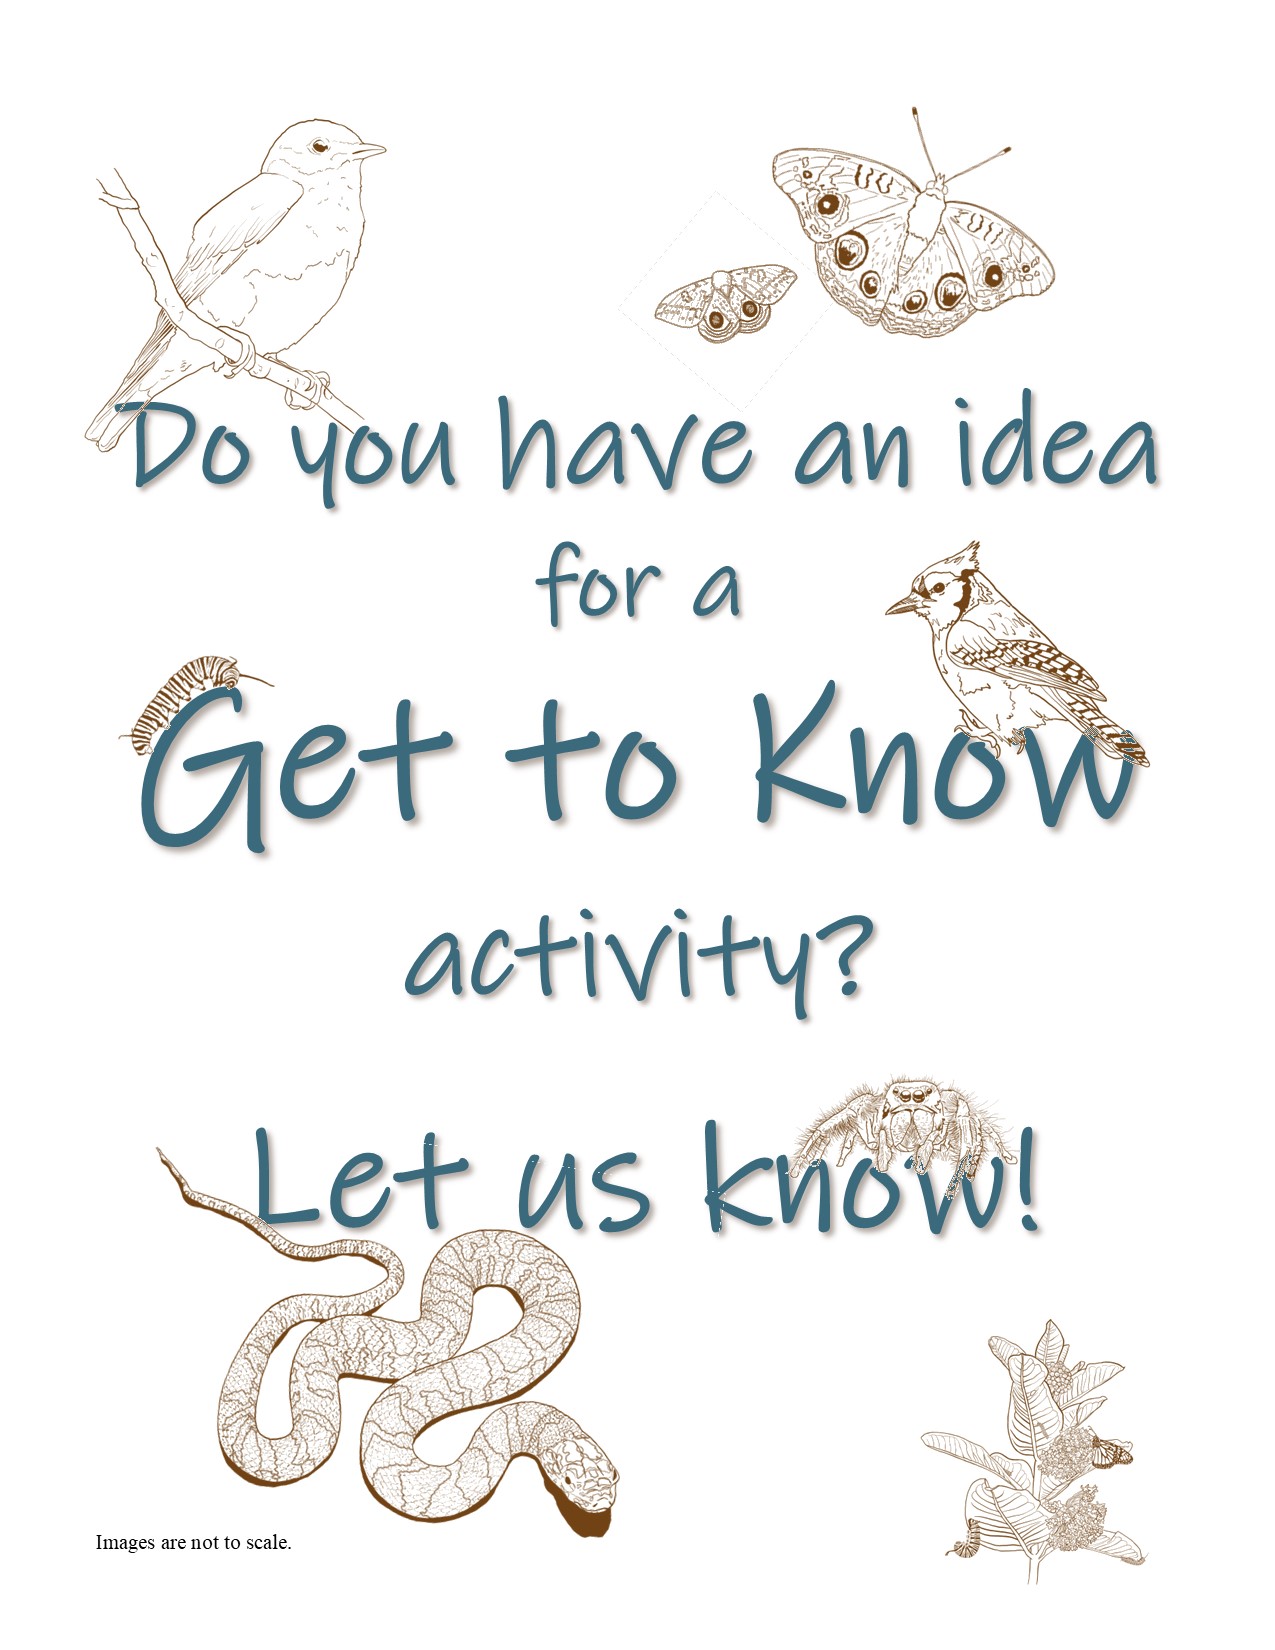 Do you have an idea for a Get to Know activity? Let us know!